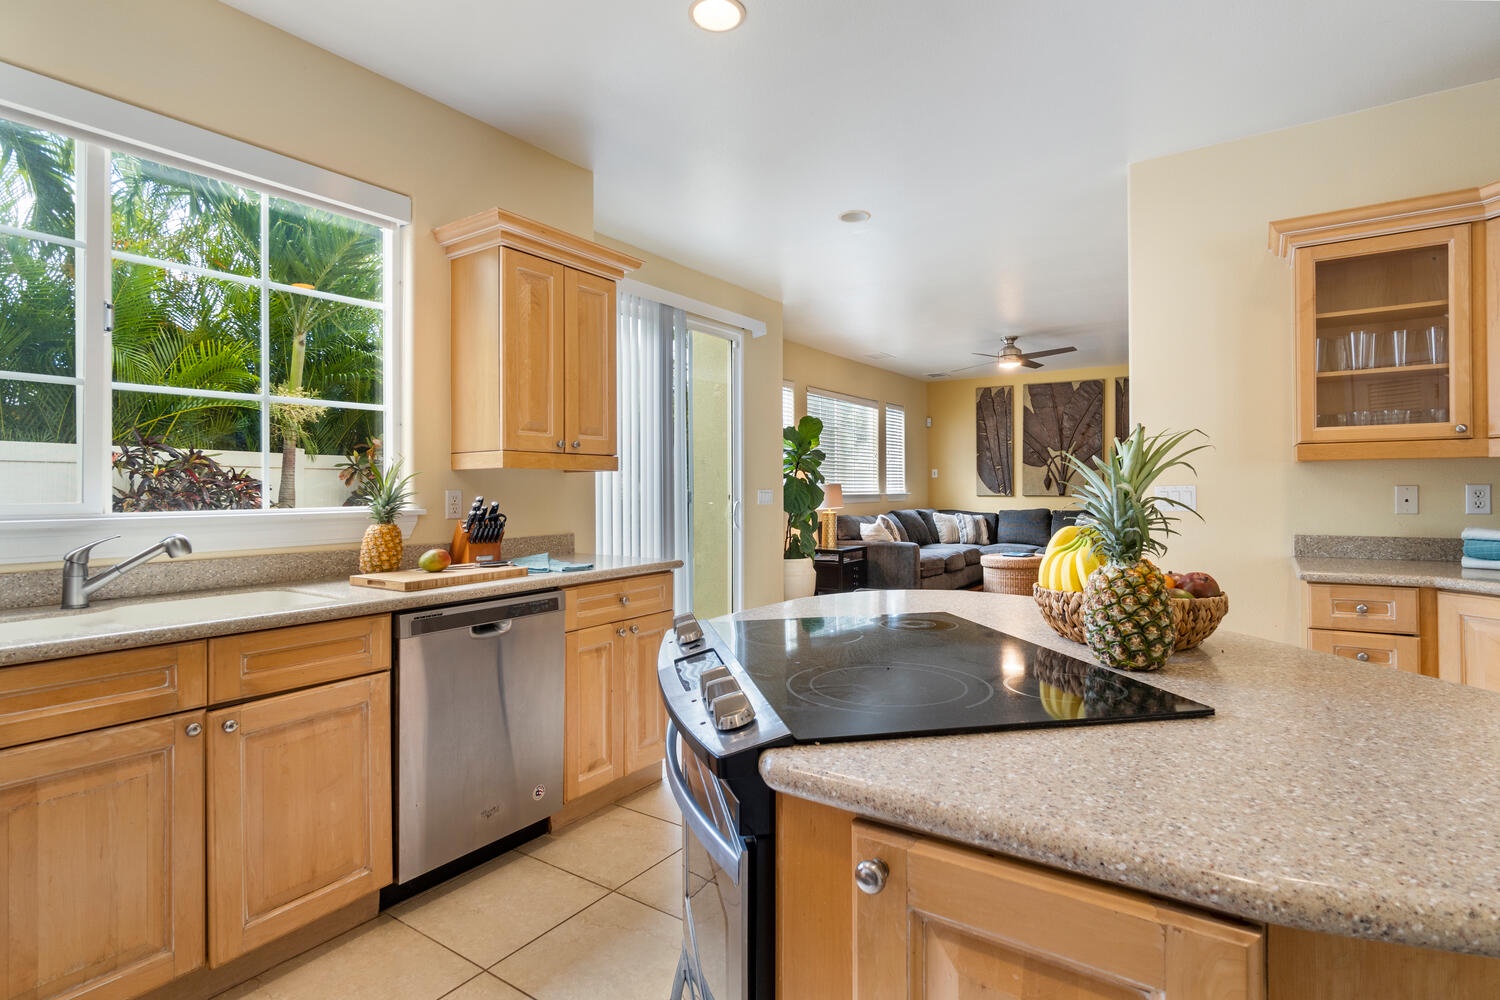 Honolulu Vacation Rentals, Melemele Hale - Kitchen and living room